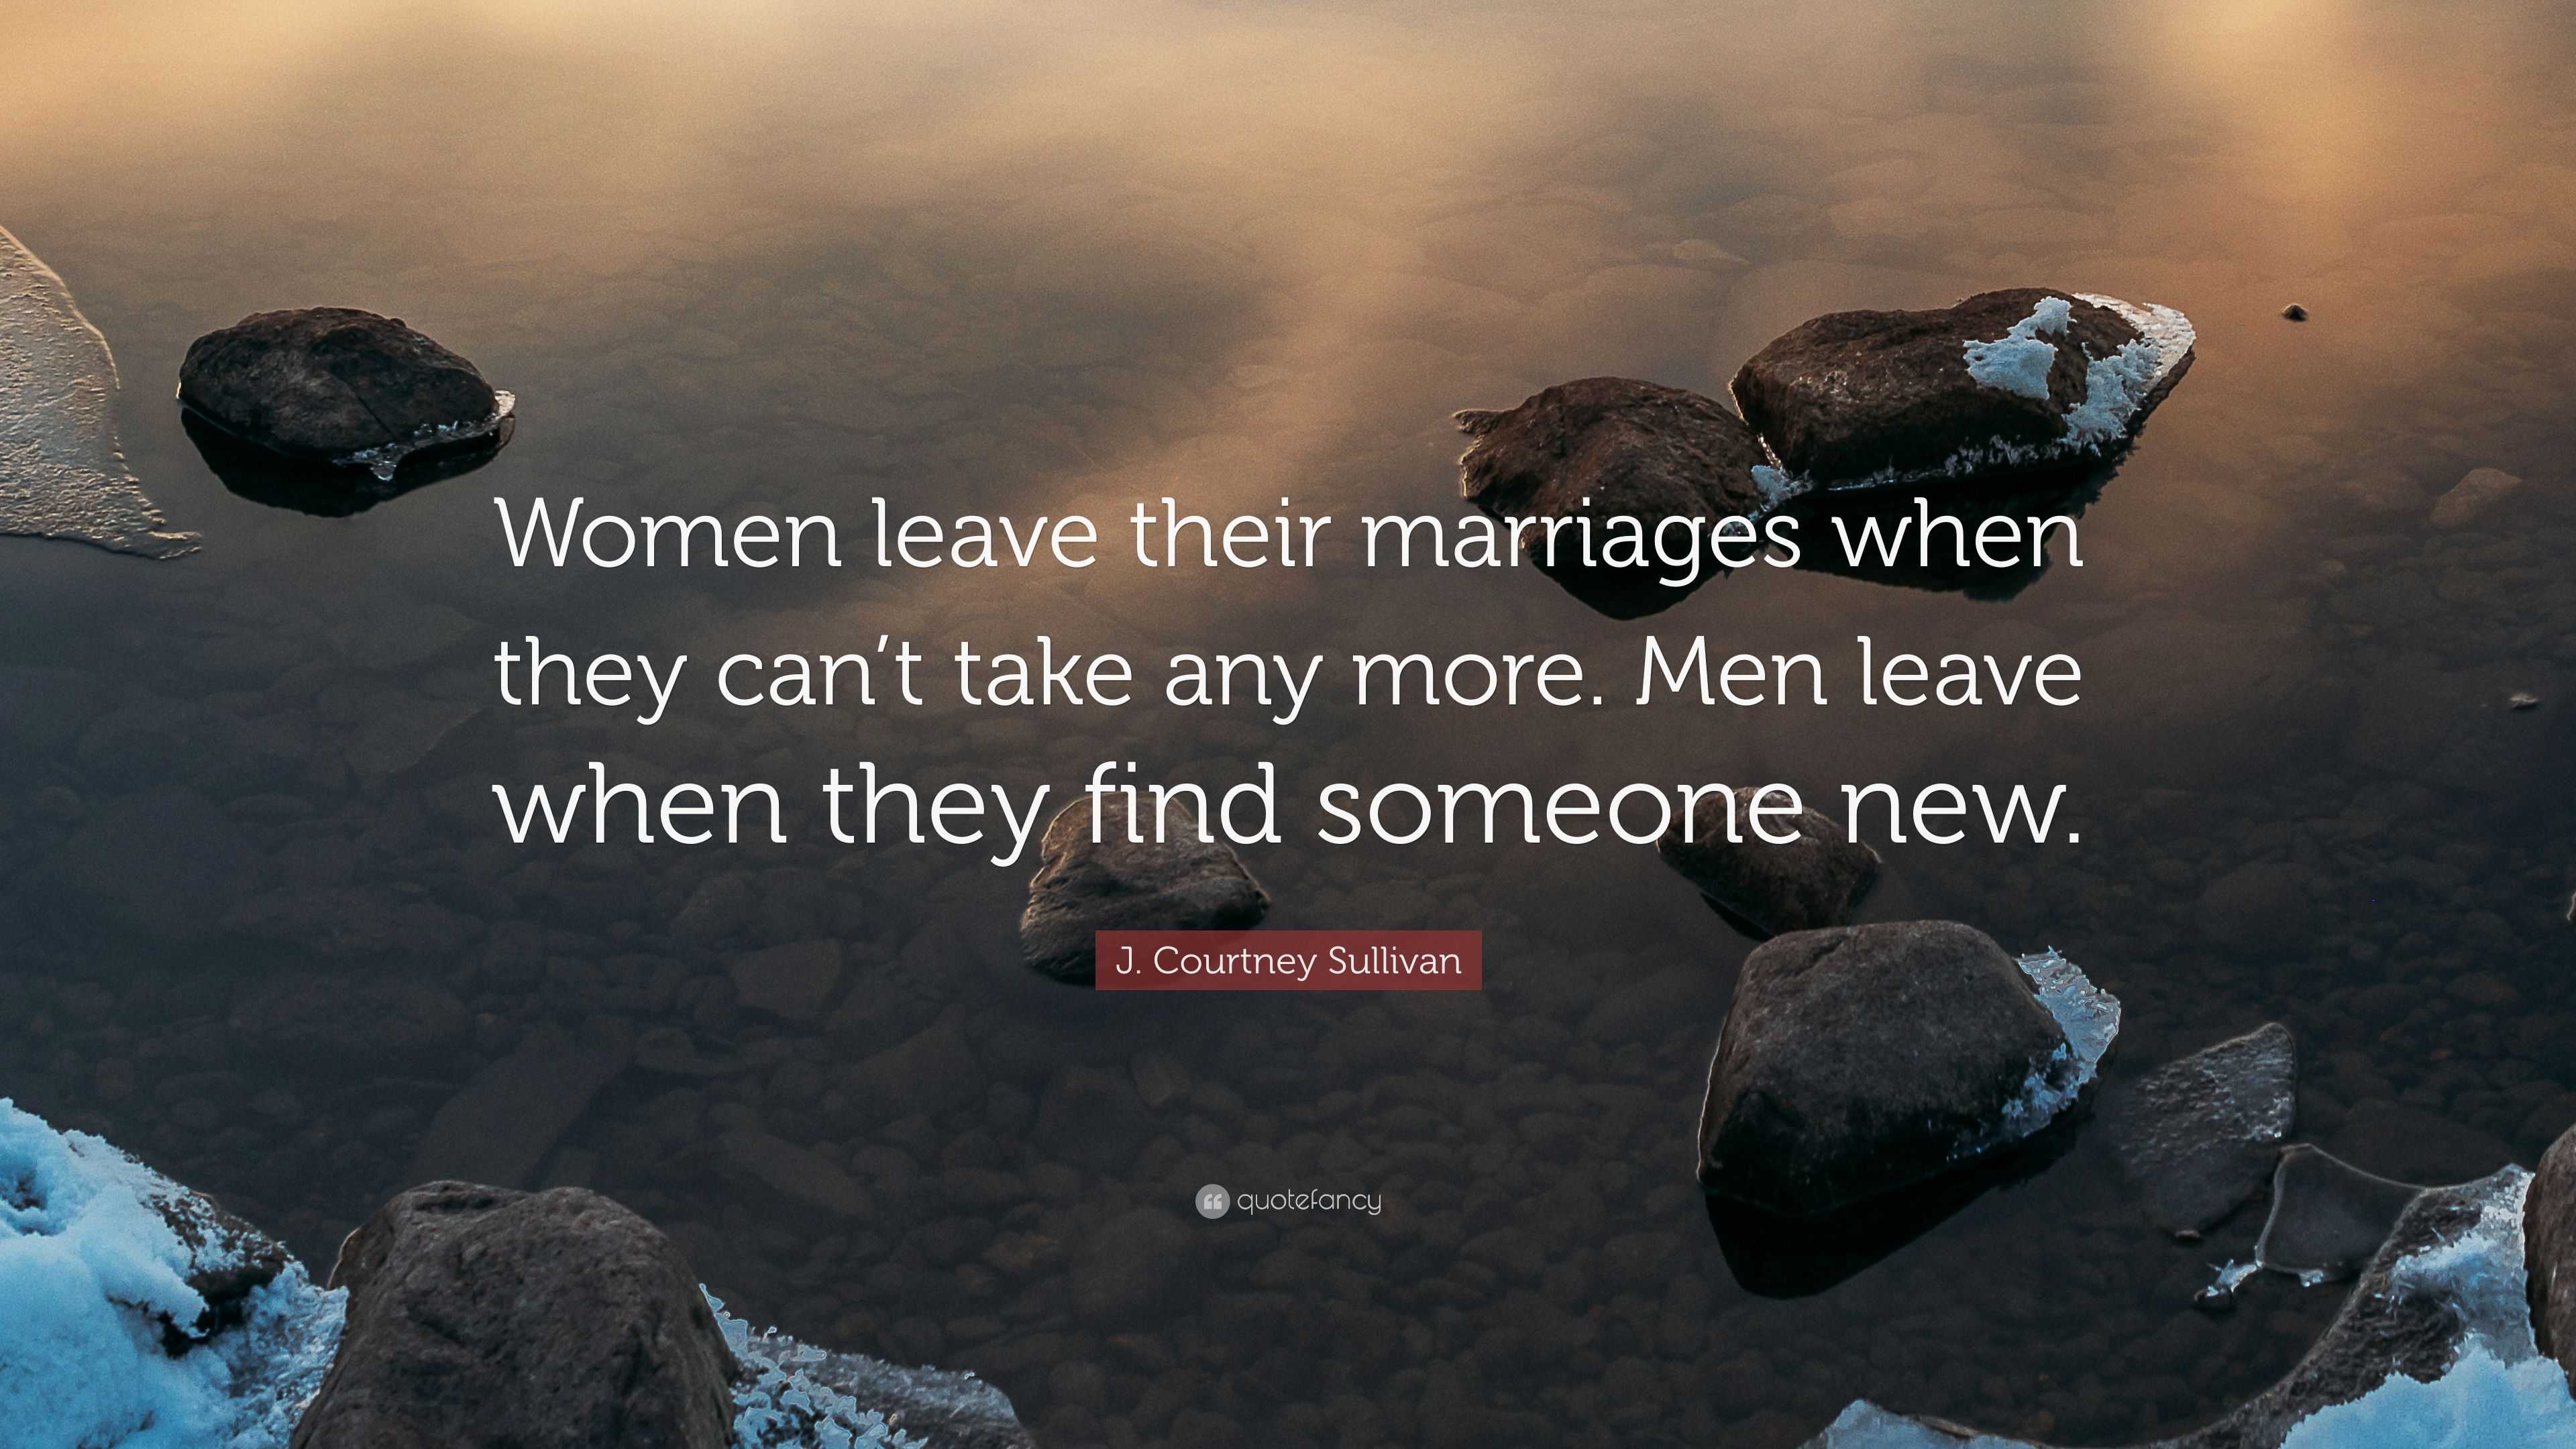 Why women leave marriages